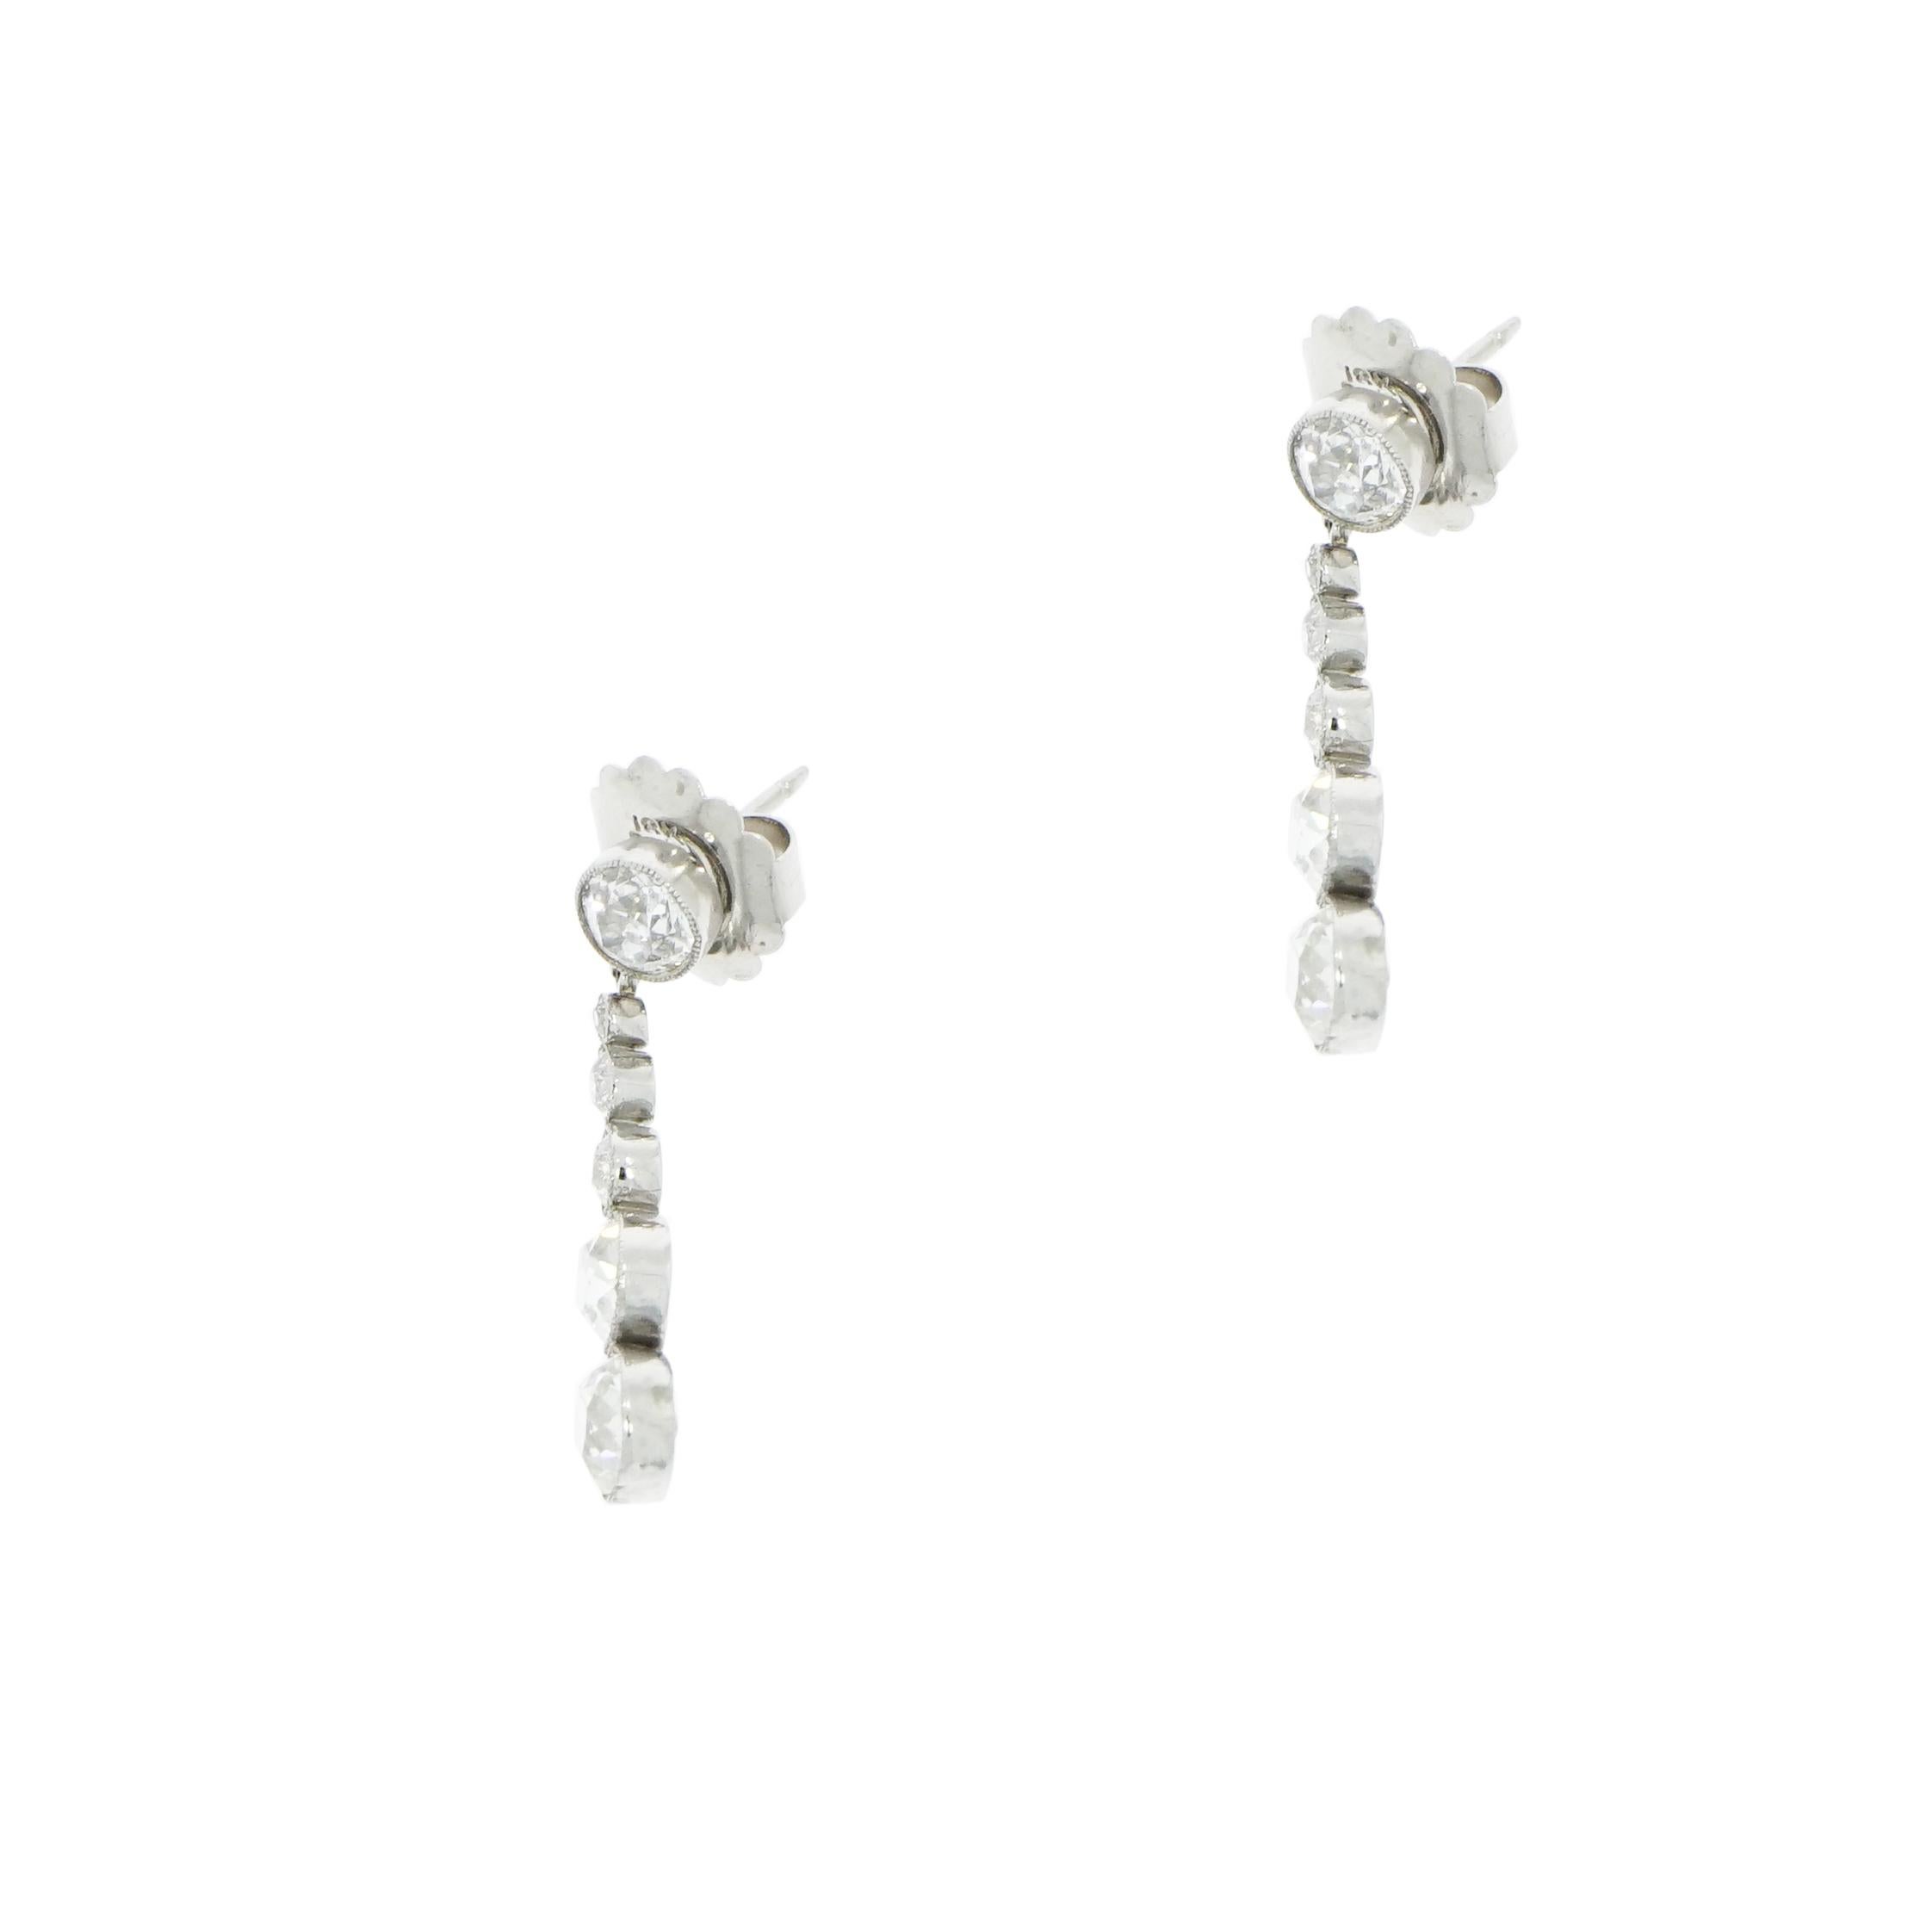 This is a very special turn of the century original handmade circa 1900-1910 bright and sparkly Old European cut Diamond drop earrings. Edwardian Deco design with Victorian influence.
These earrings are comprised of 6 Graduated Old European cut